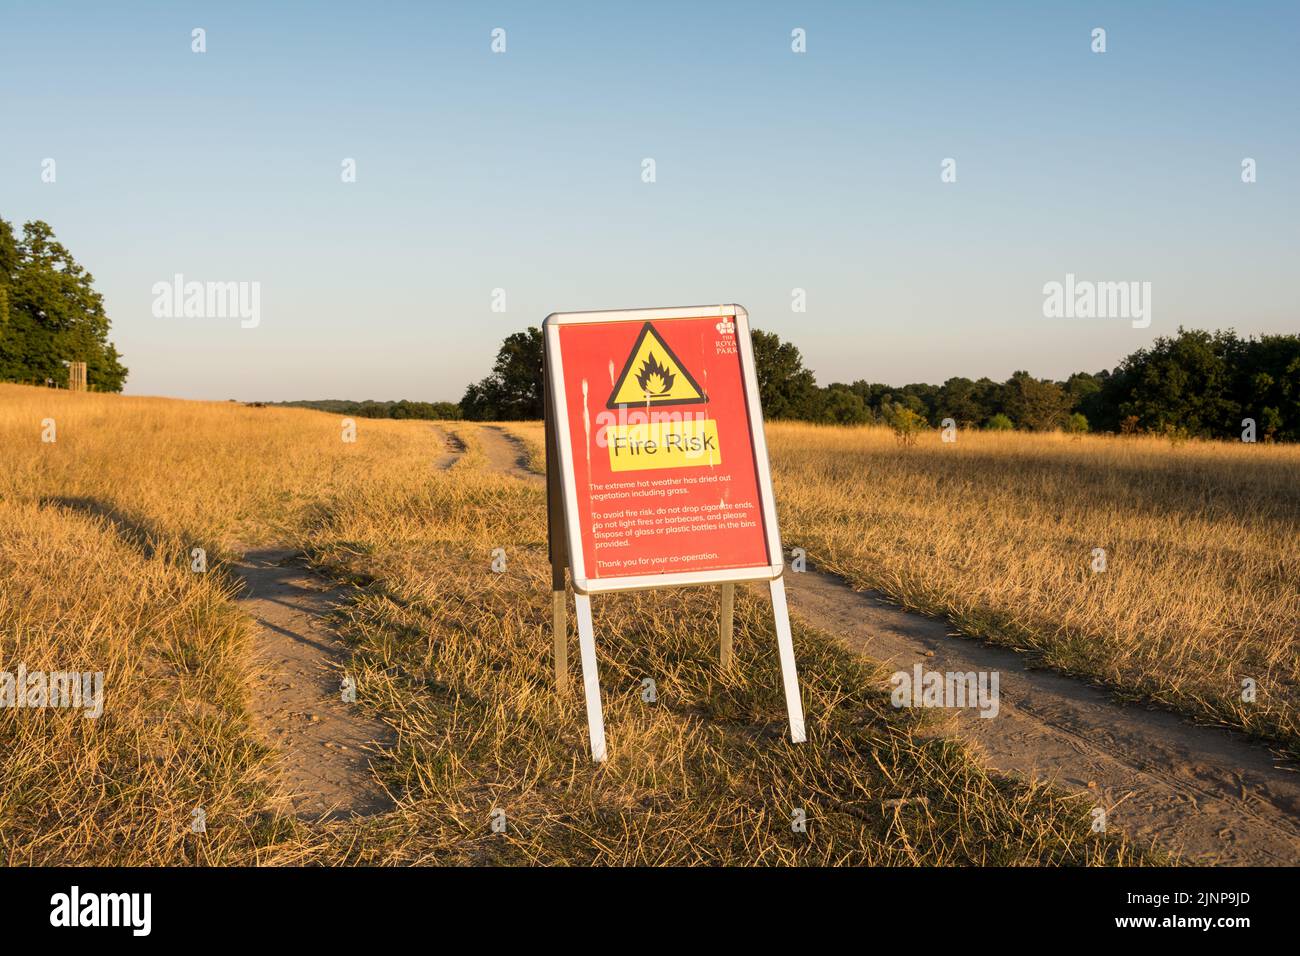 London, England, UK. 12 August 2022.  A Fire Risk sign during a drought in a scorched Richmond Park. © Benjamin John Stock Photo